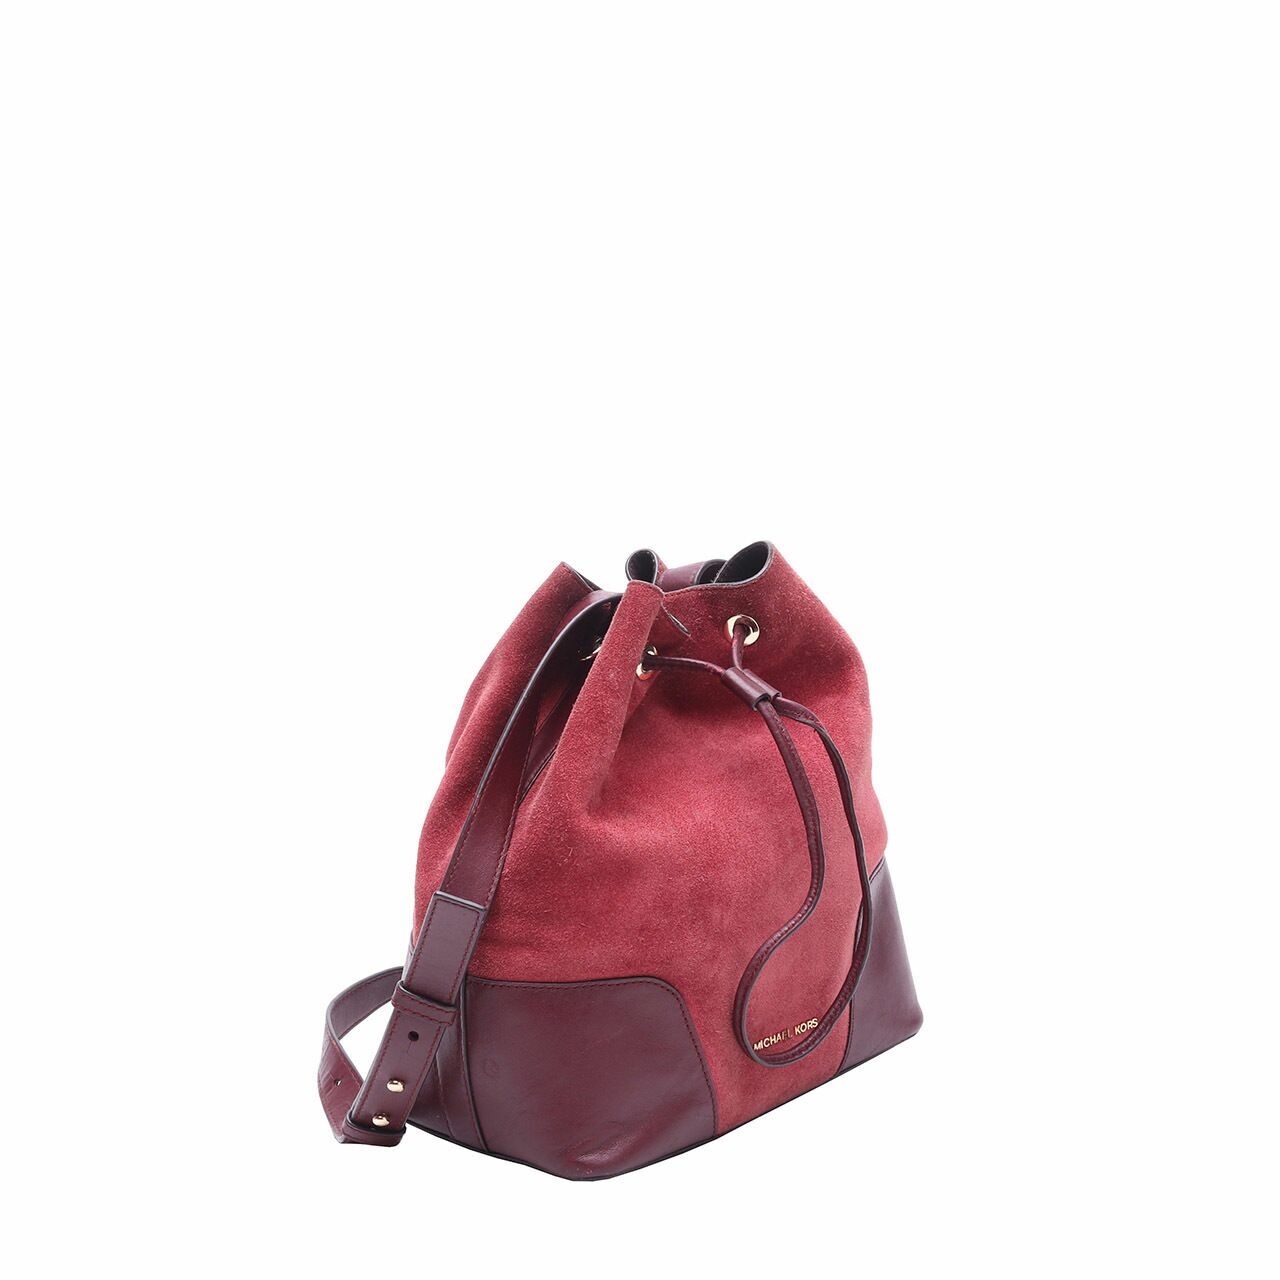 Michael Kors Cary Medium Maroon Suede and Leather Bucket Bag